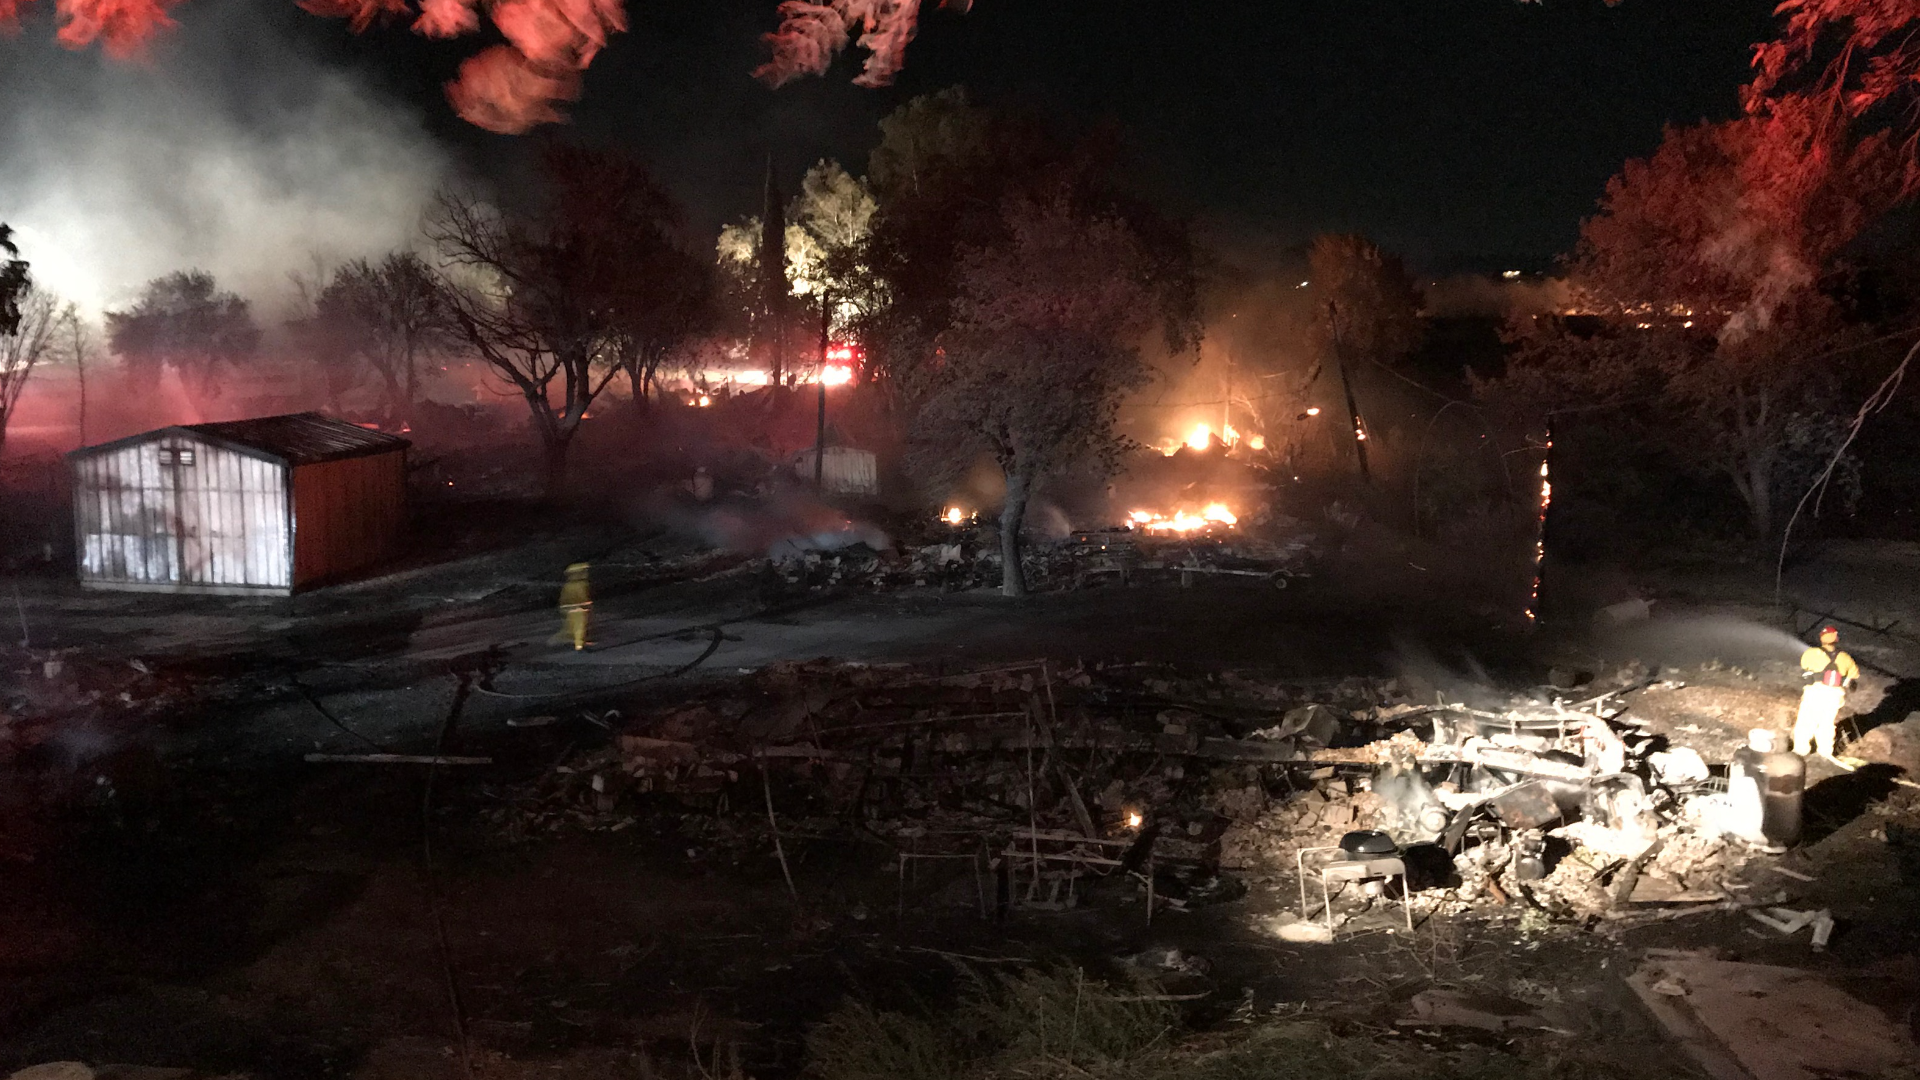 Firefighters are expecting to work through the night to douse the destructive fire.